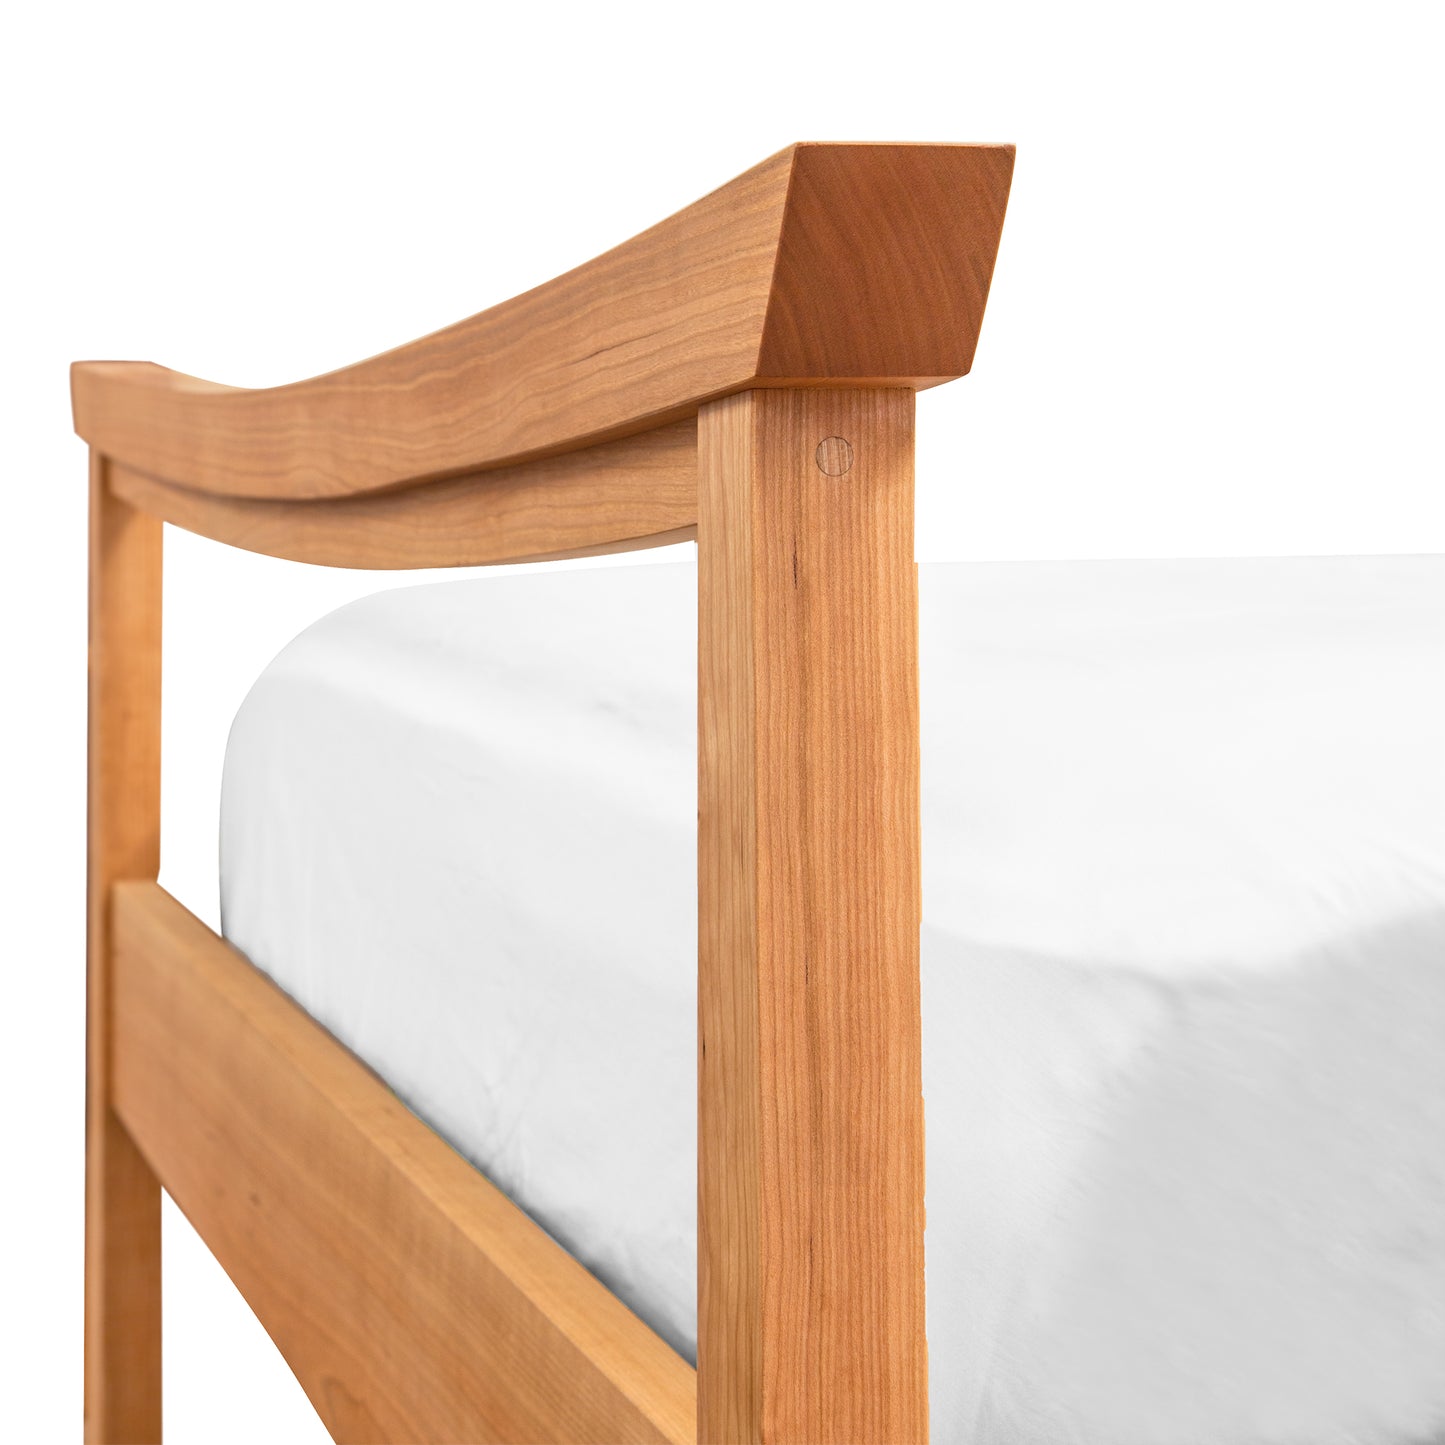 A close-up of a Maple Corner Woodworks Cherry Moon Pagoda Bed frame’s headboard featuring a curved top rail and vertical post, made from natural cherry hardwood, set against a white background with a partially visible white mattress